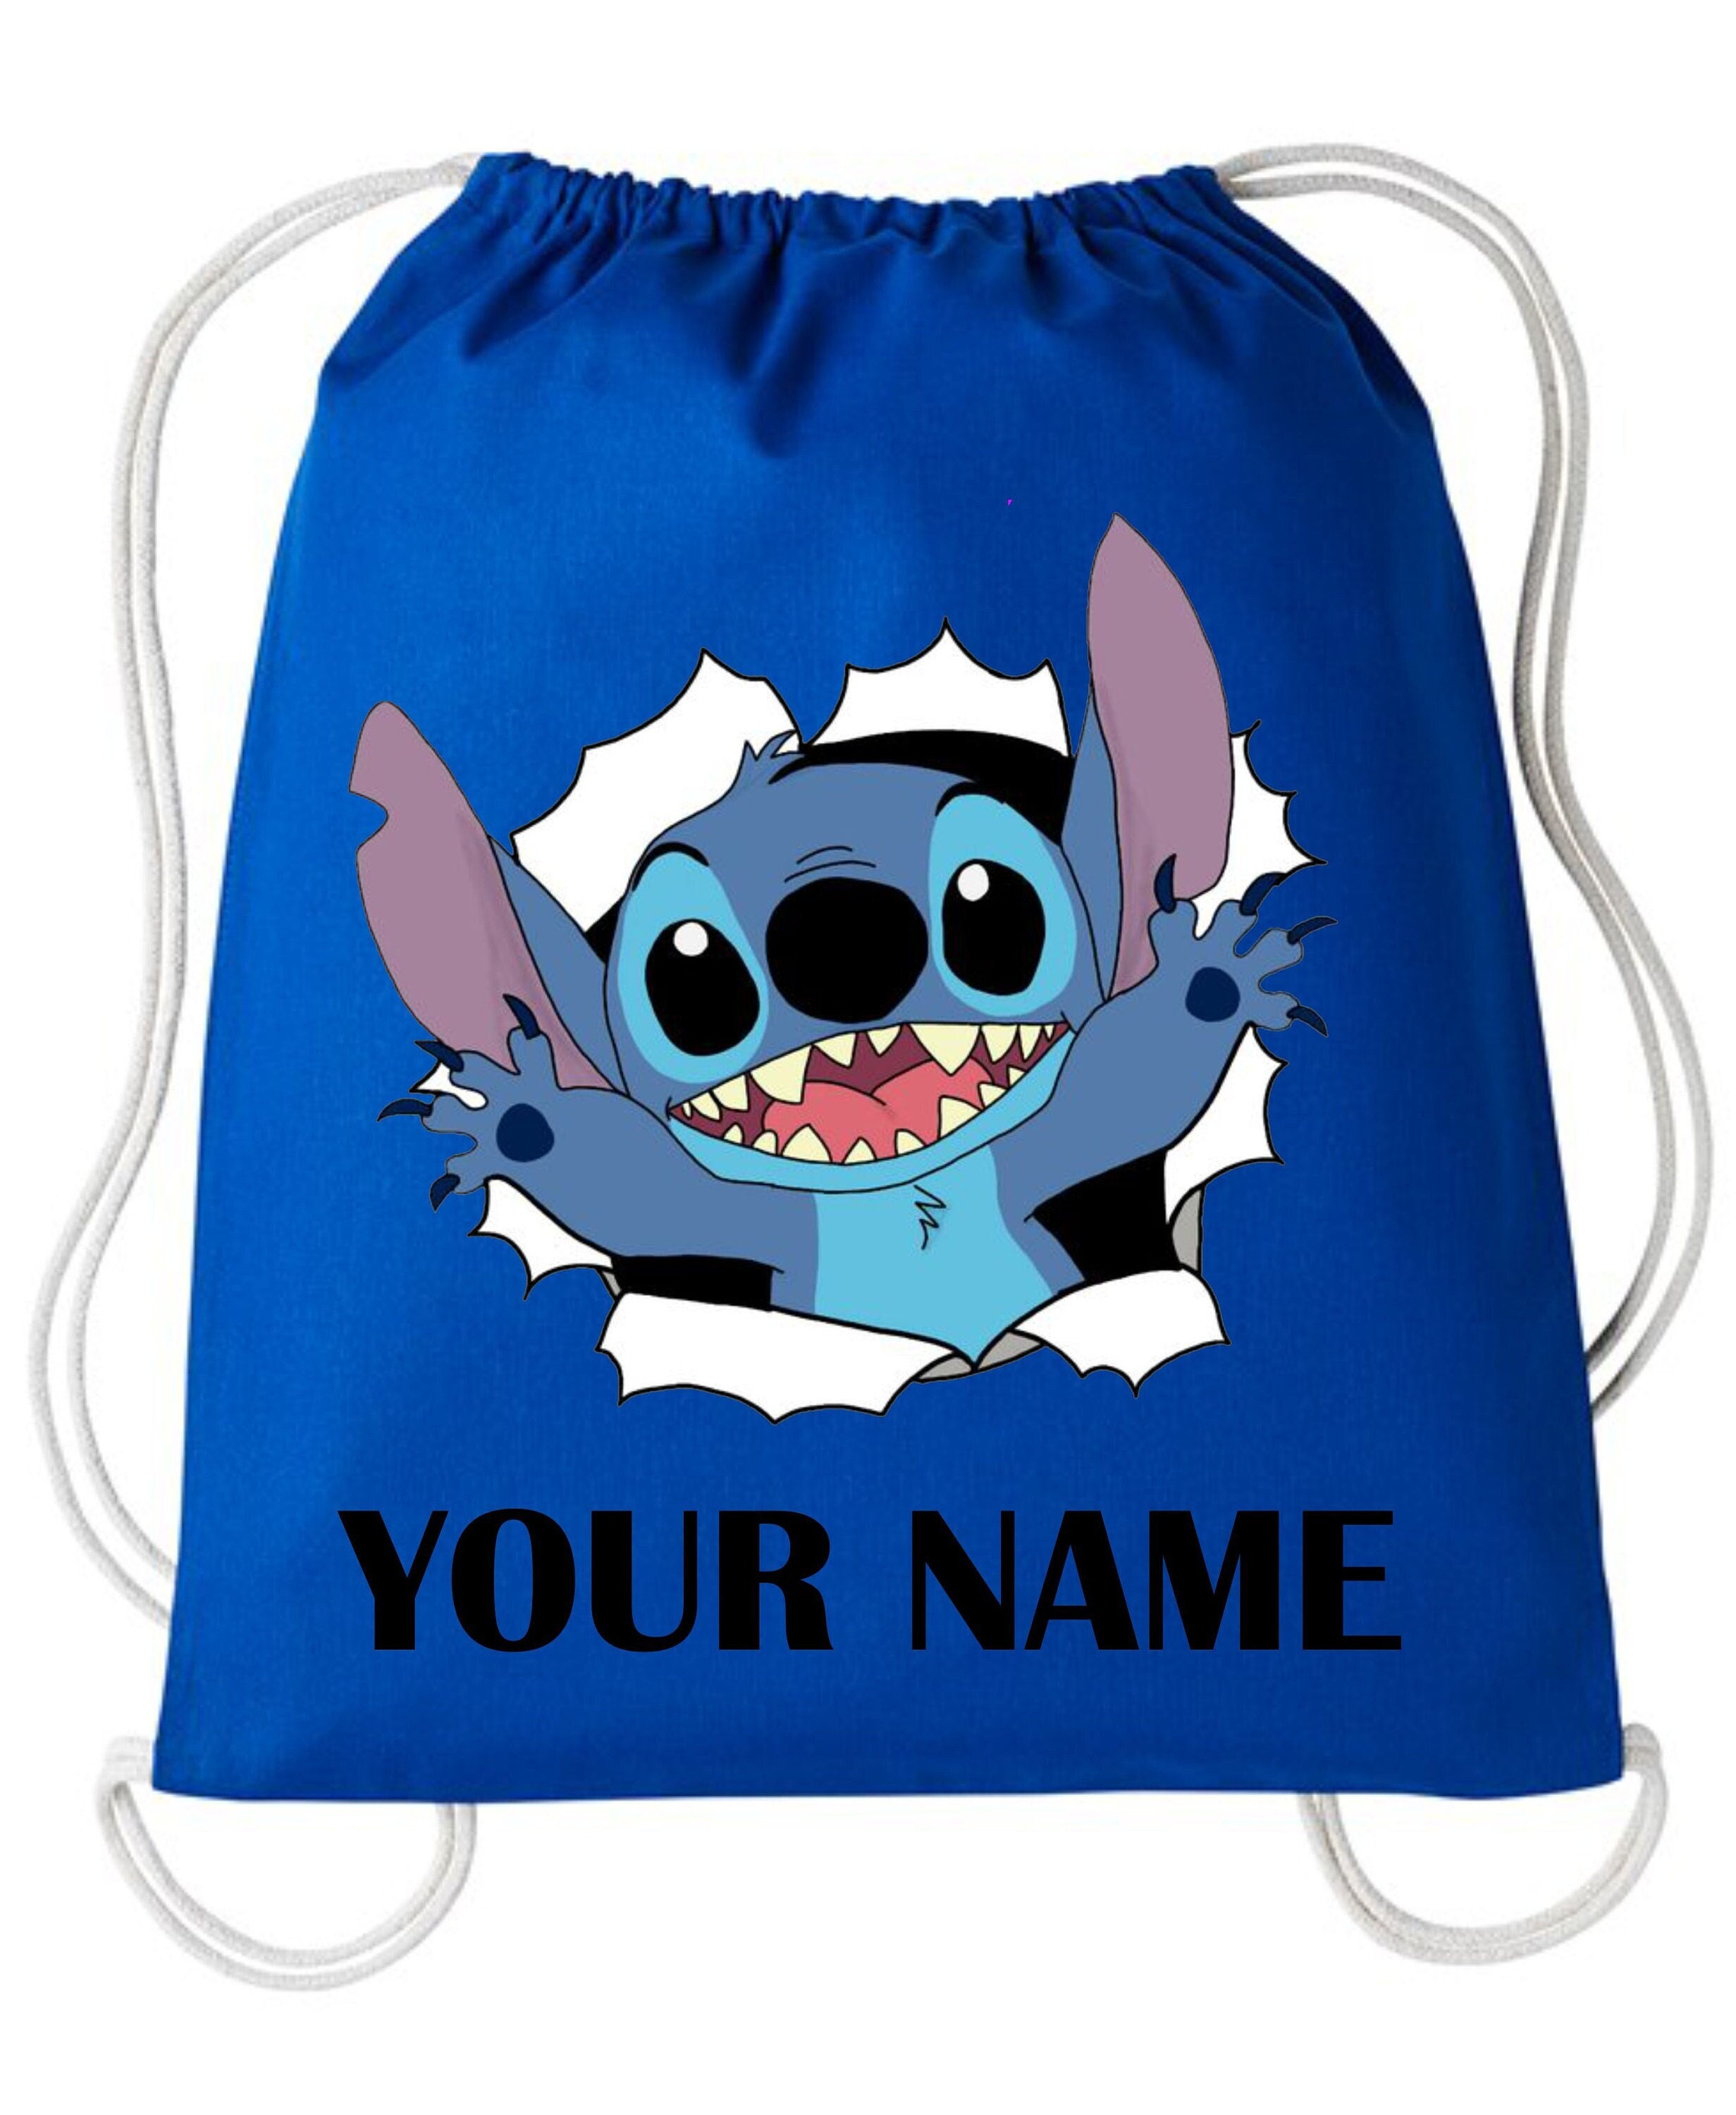 Ohana Means Family Lilo and Stitch Themed Pencil Case-make up Case